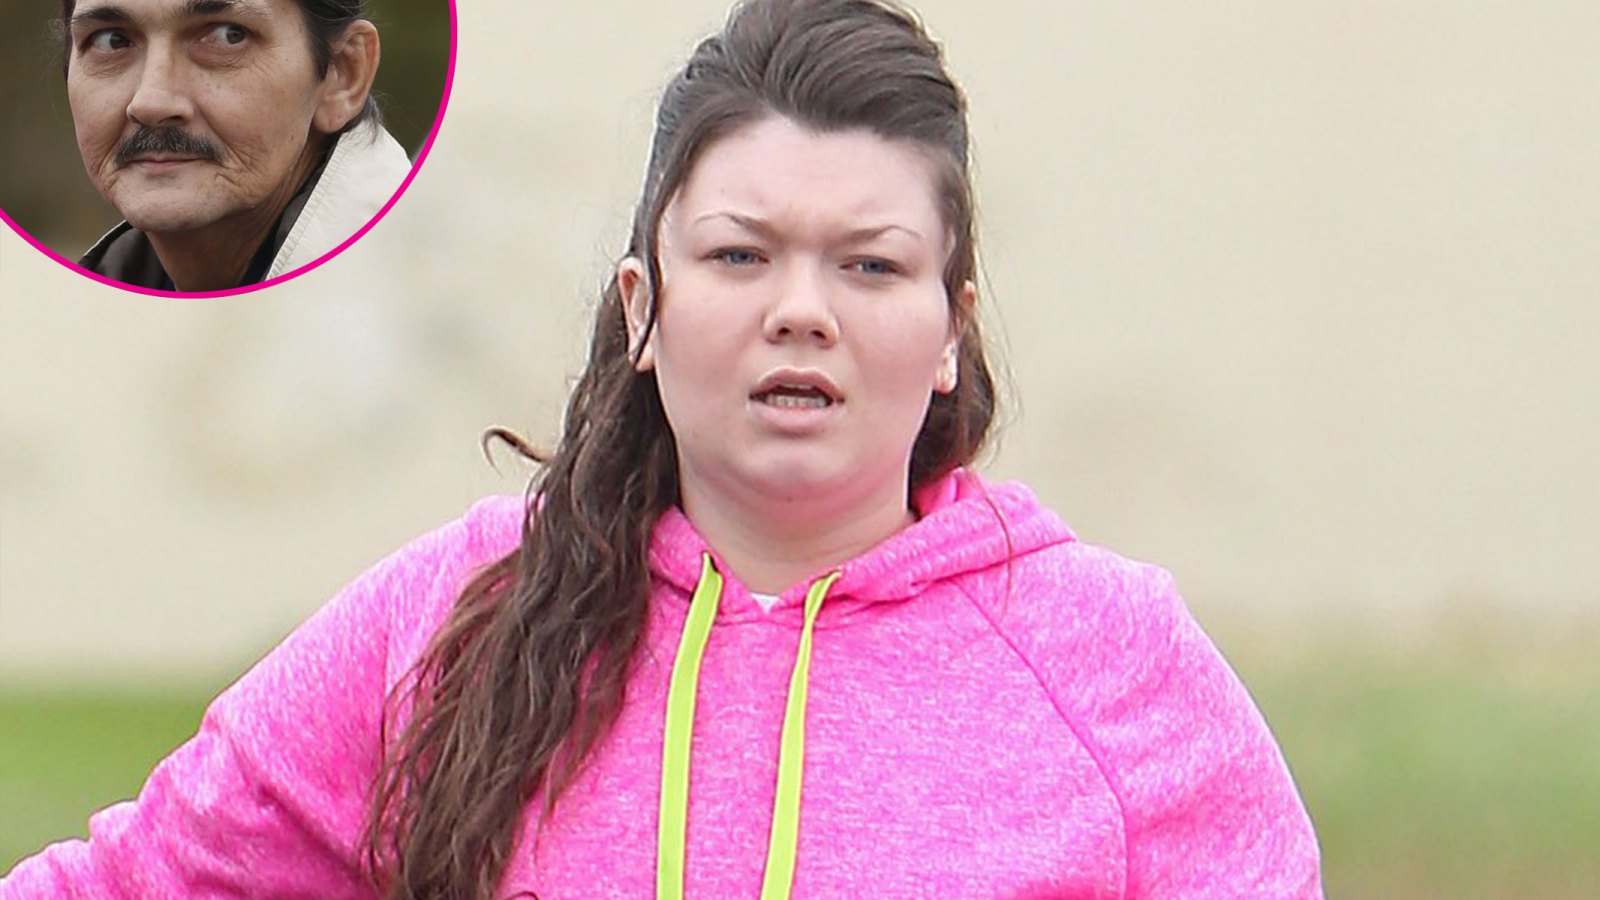 Amber Portwood S Father Shawn Portwood Dead At 50 After Liver Surgery